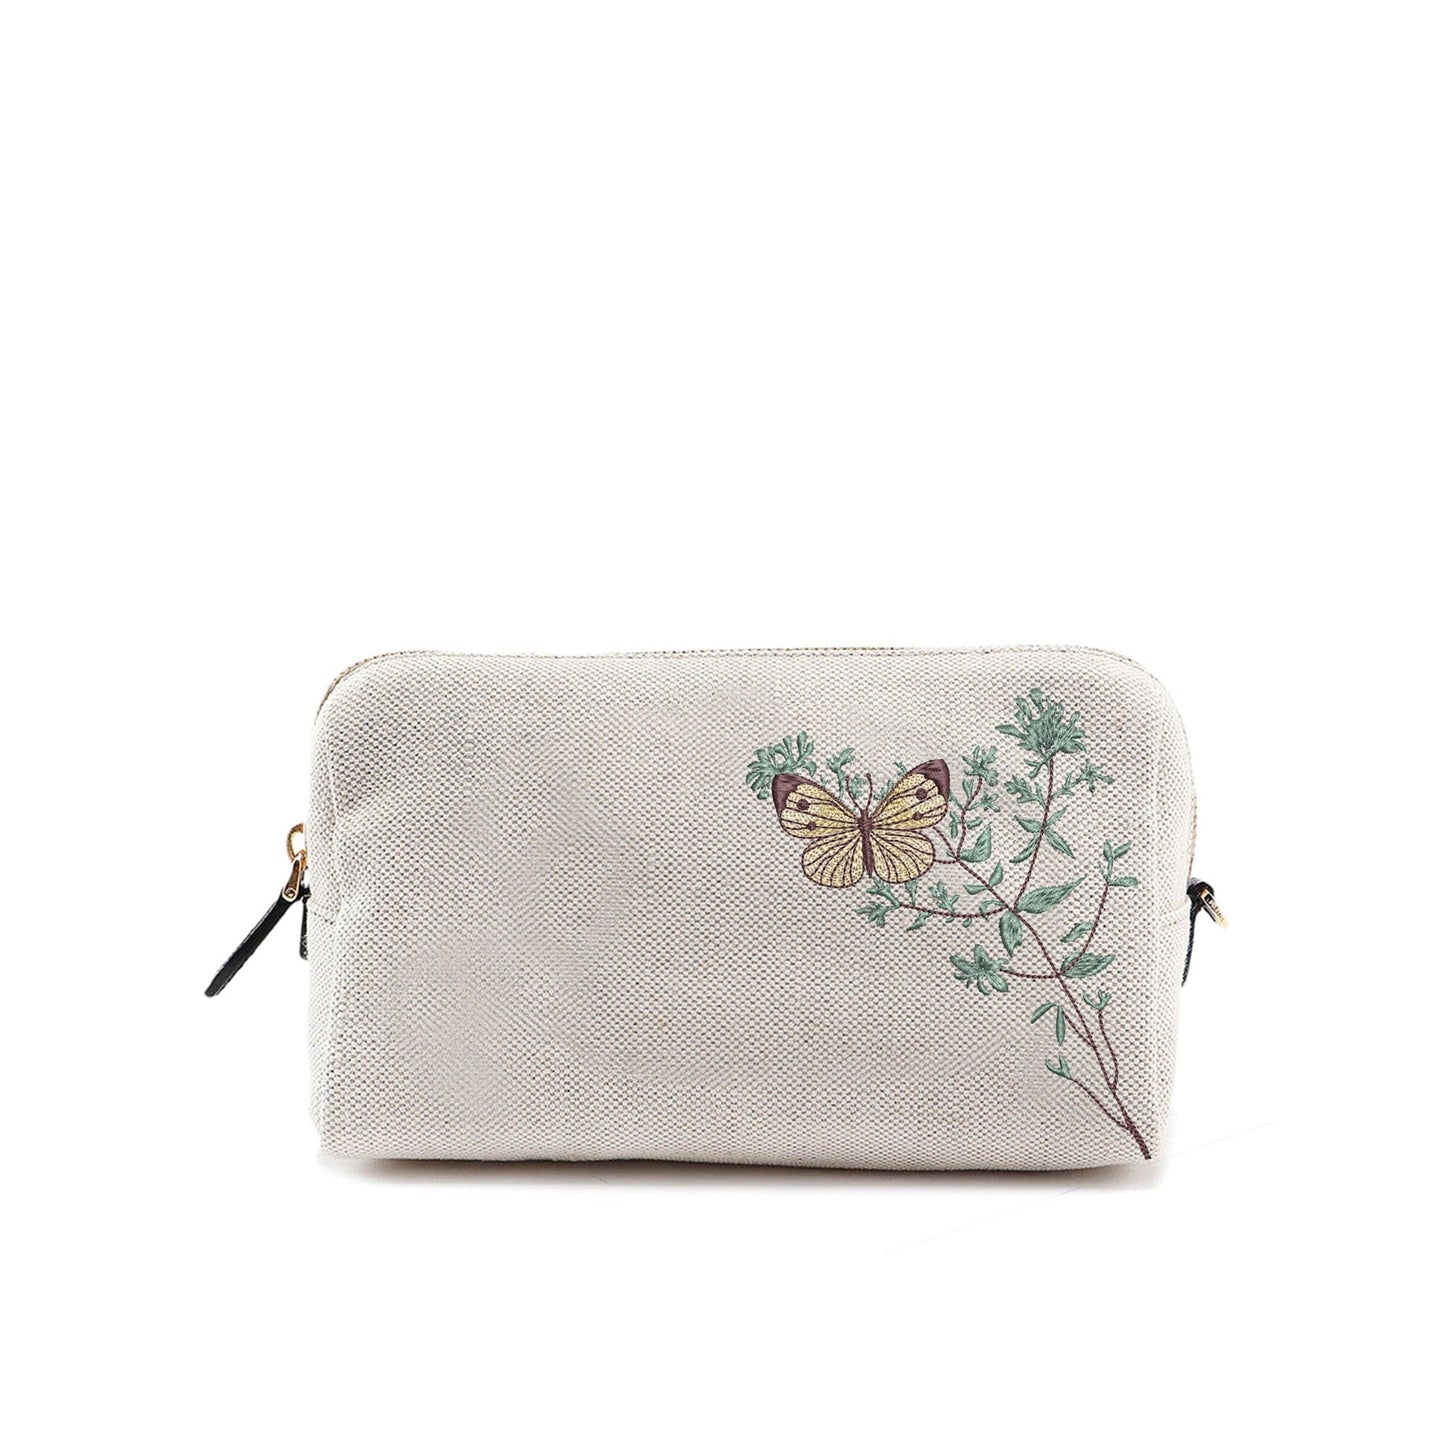 Vintage style Flower Butterfly Machine Embroidery Design on pouch